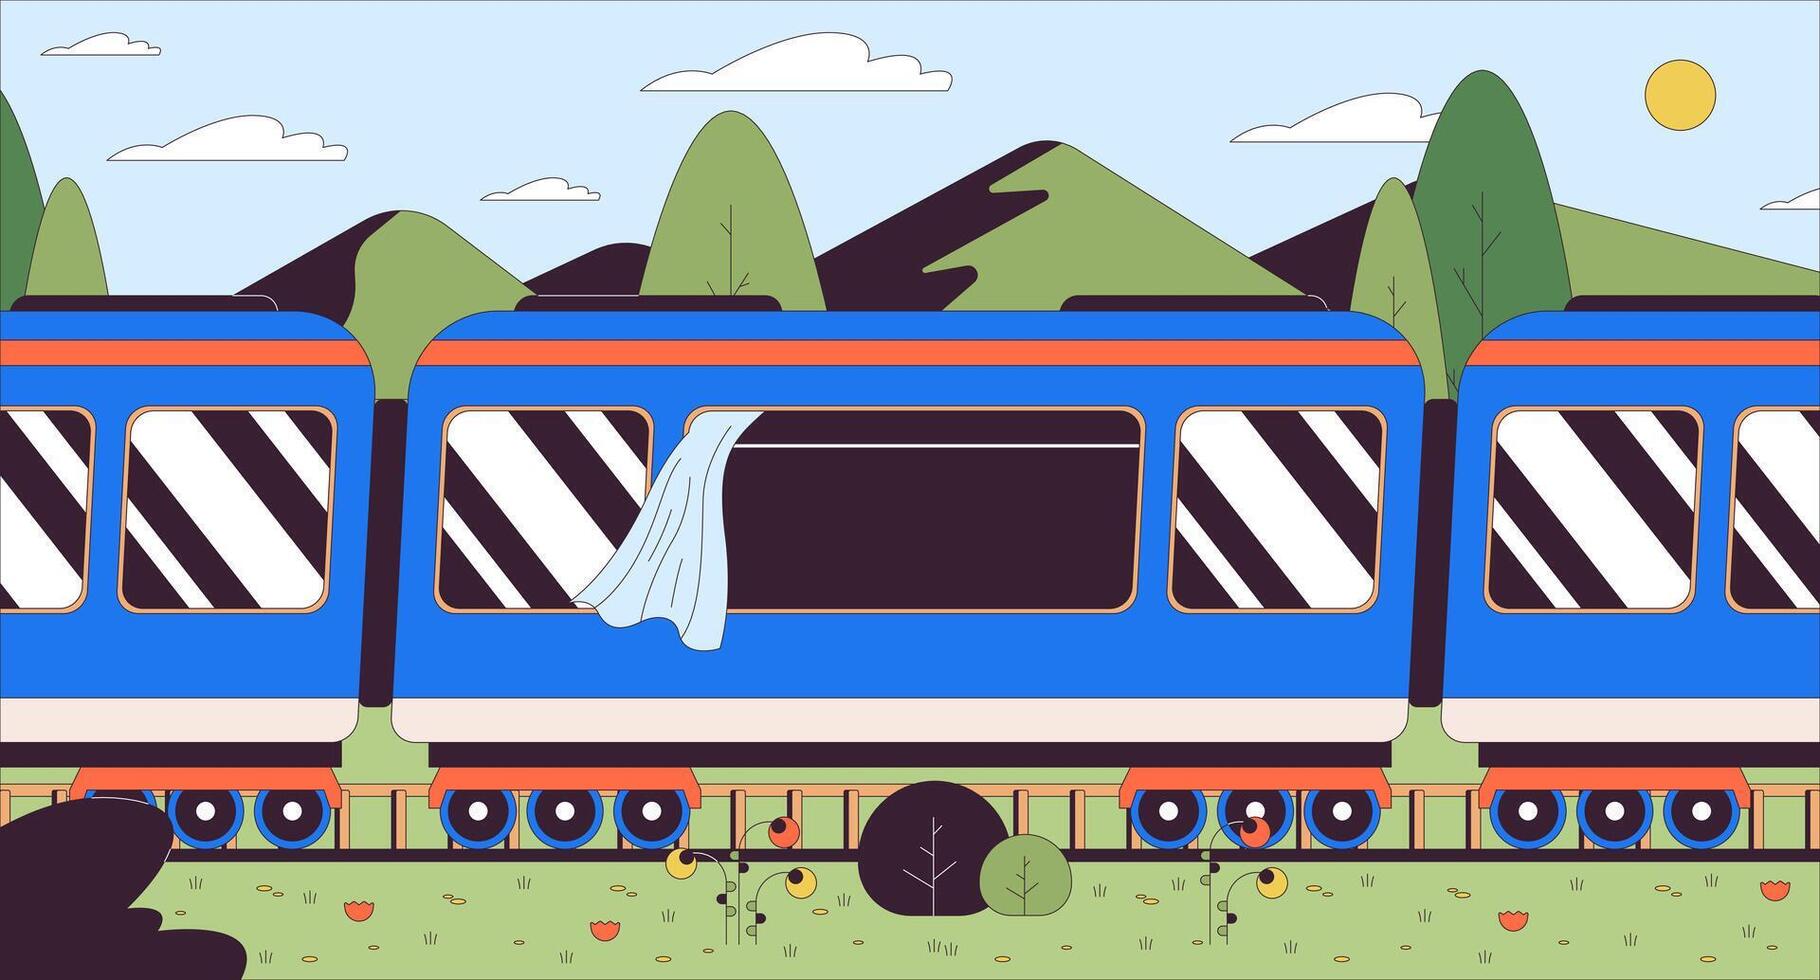 Train riding through lush grass mountains cartoon flat illustration. Railway summer 2D line scenery colorful background. Travelling countryside. Railroad spring day scene vector storytelling image